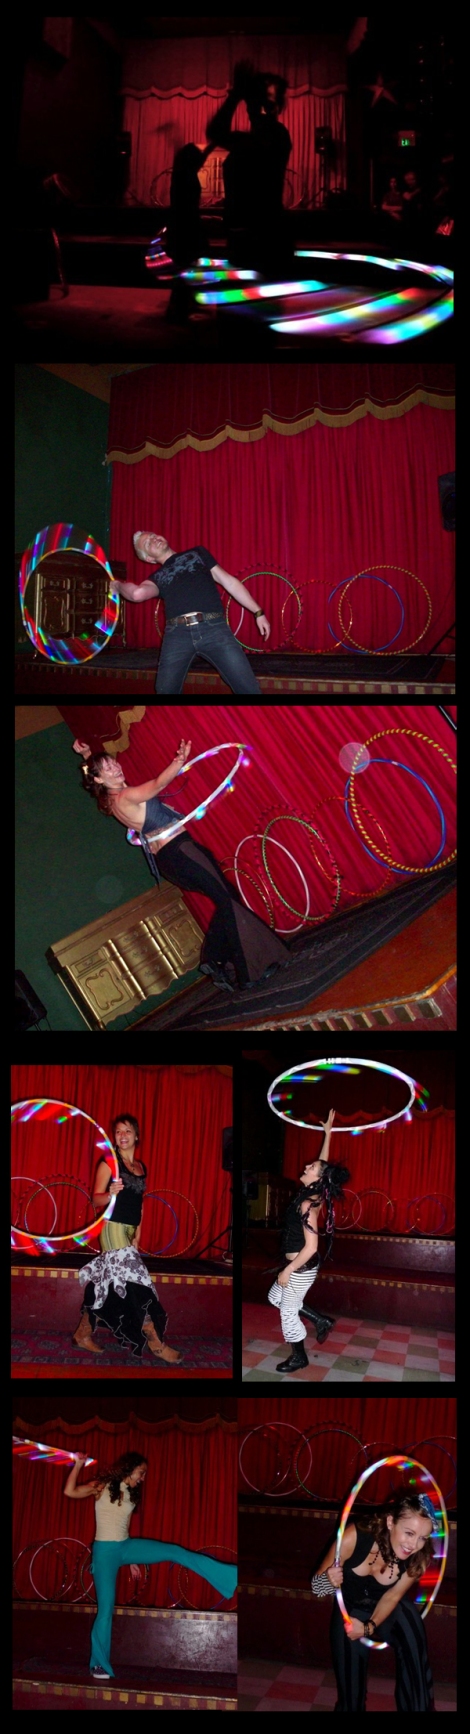 and lots & lots of excellent hooping